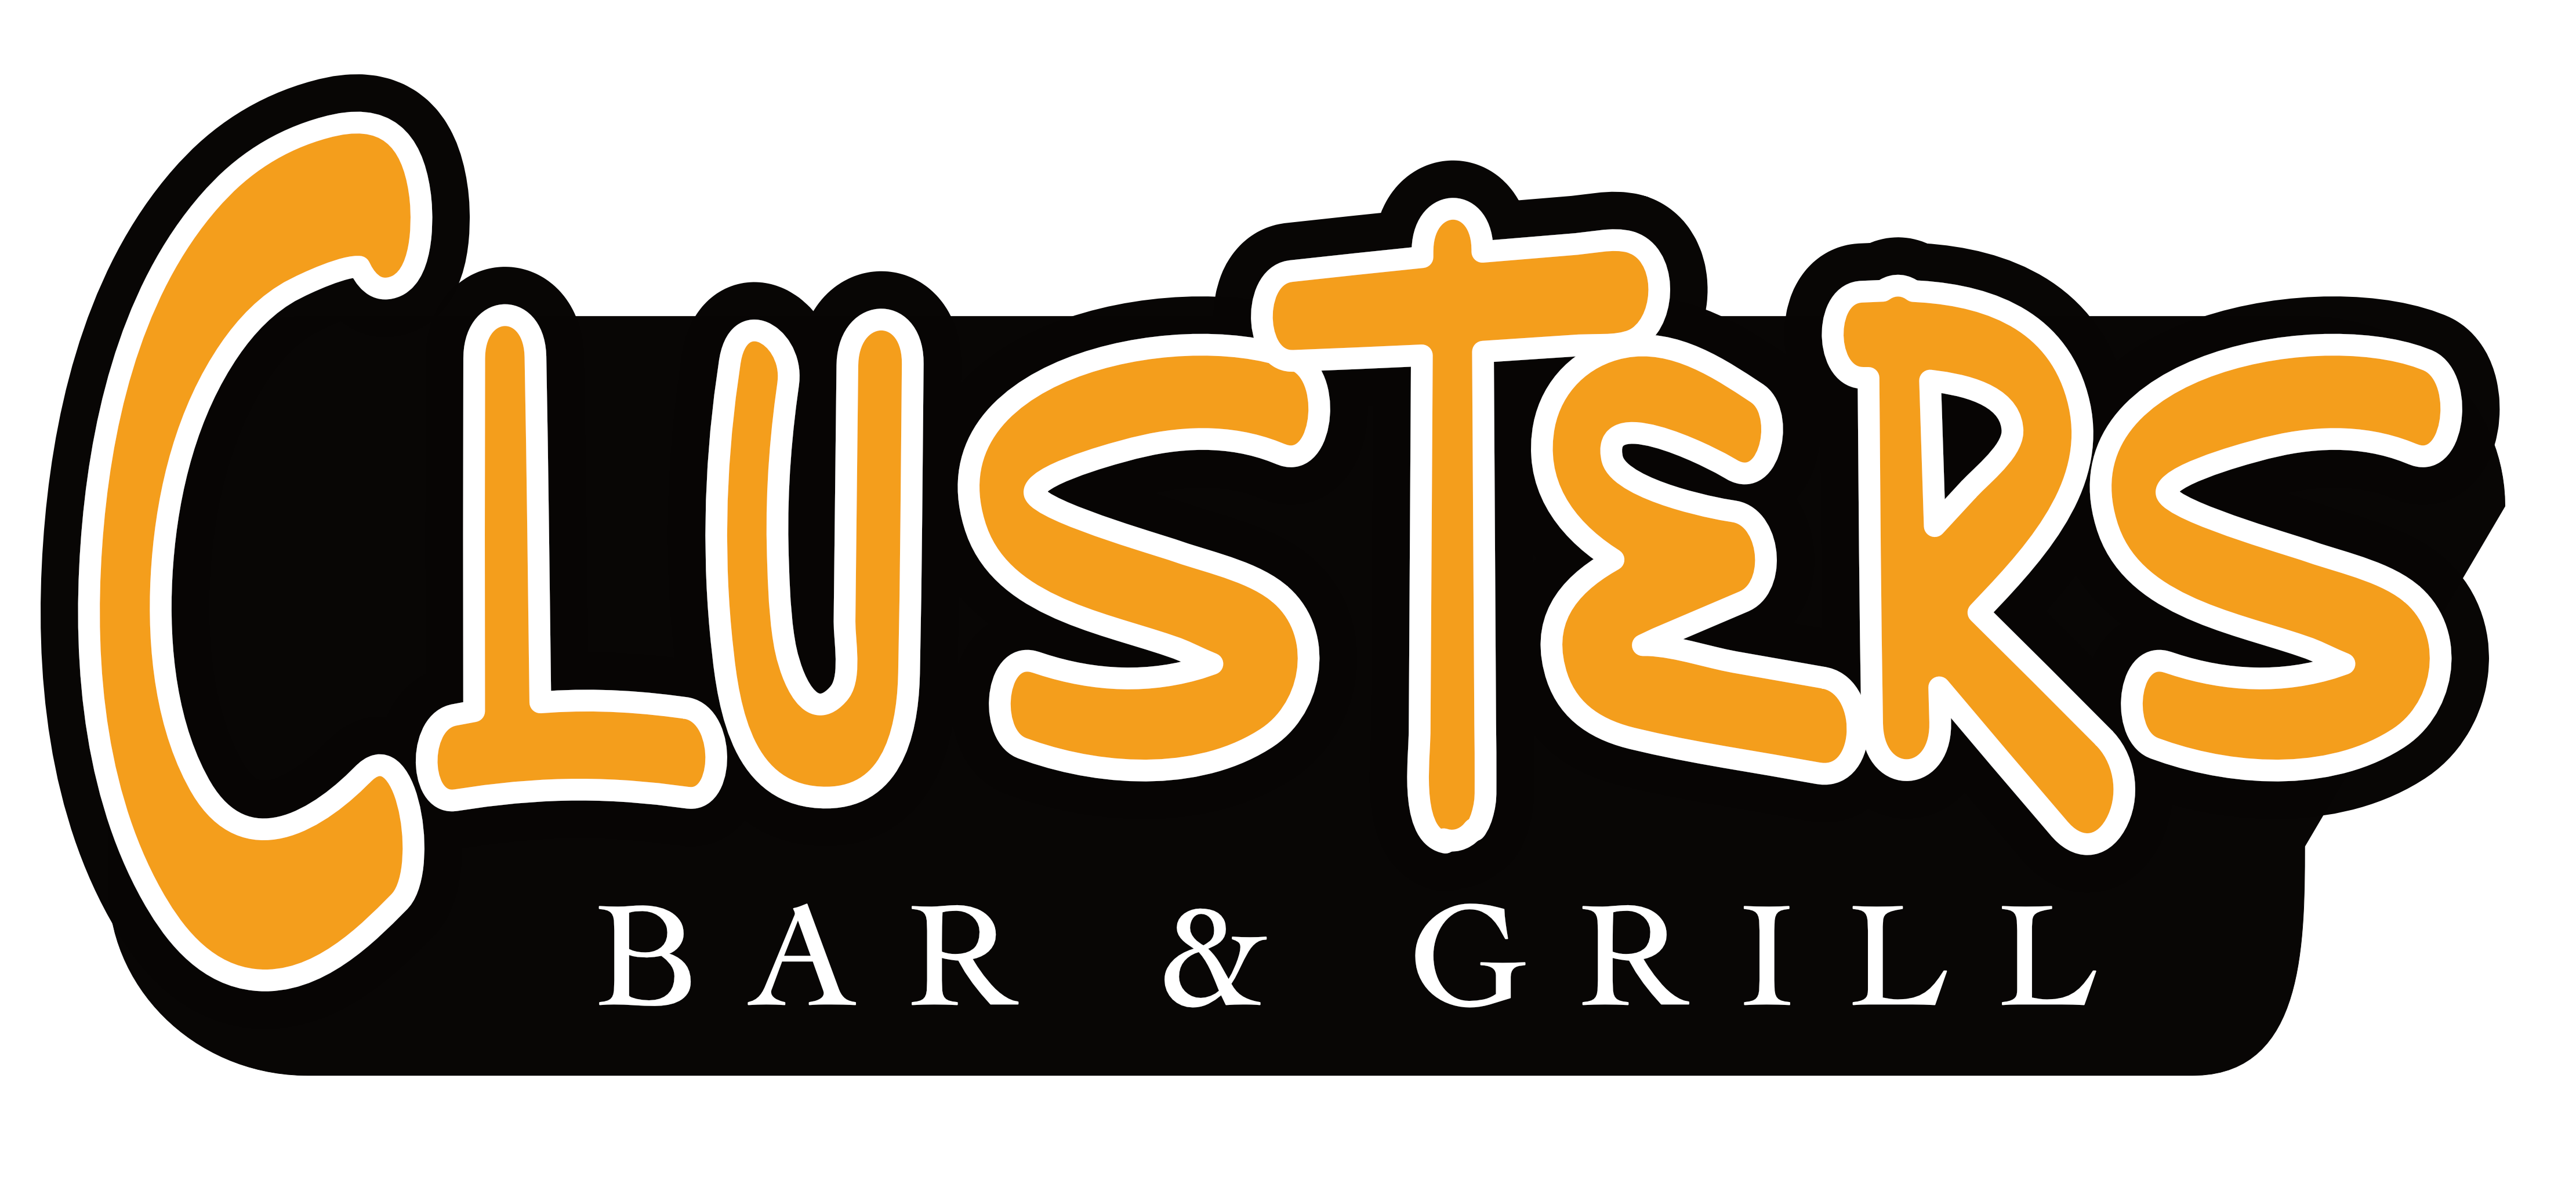 Clusters Bar & Grill Logo